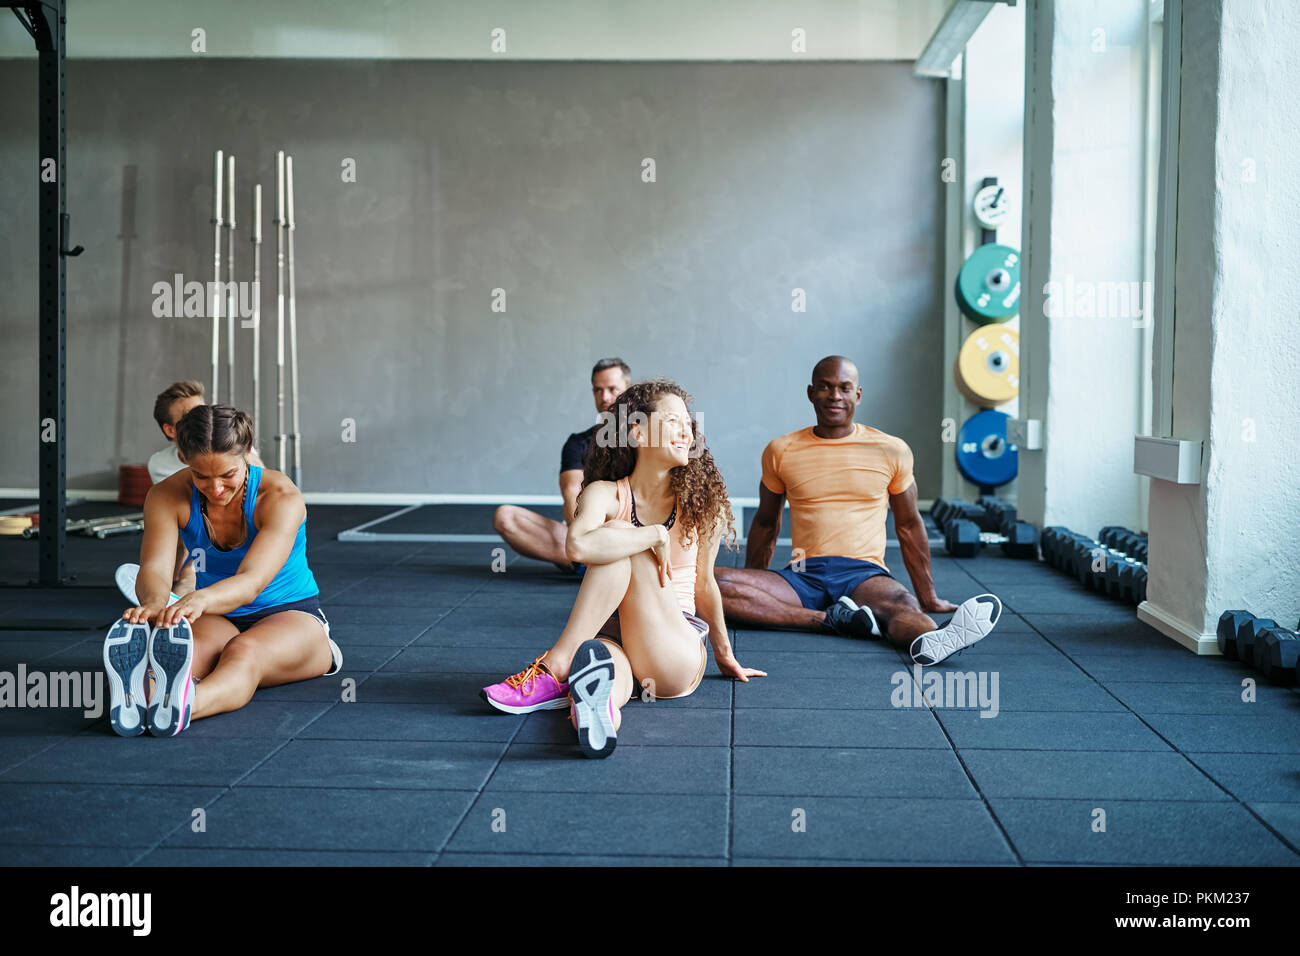 Diverse group of fit people in sportswear stretching together before a class at a health club Stock Photo